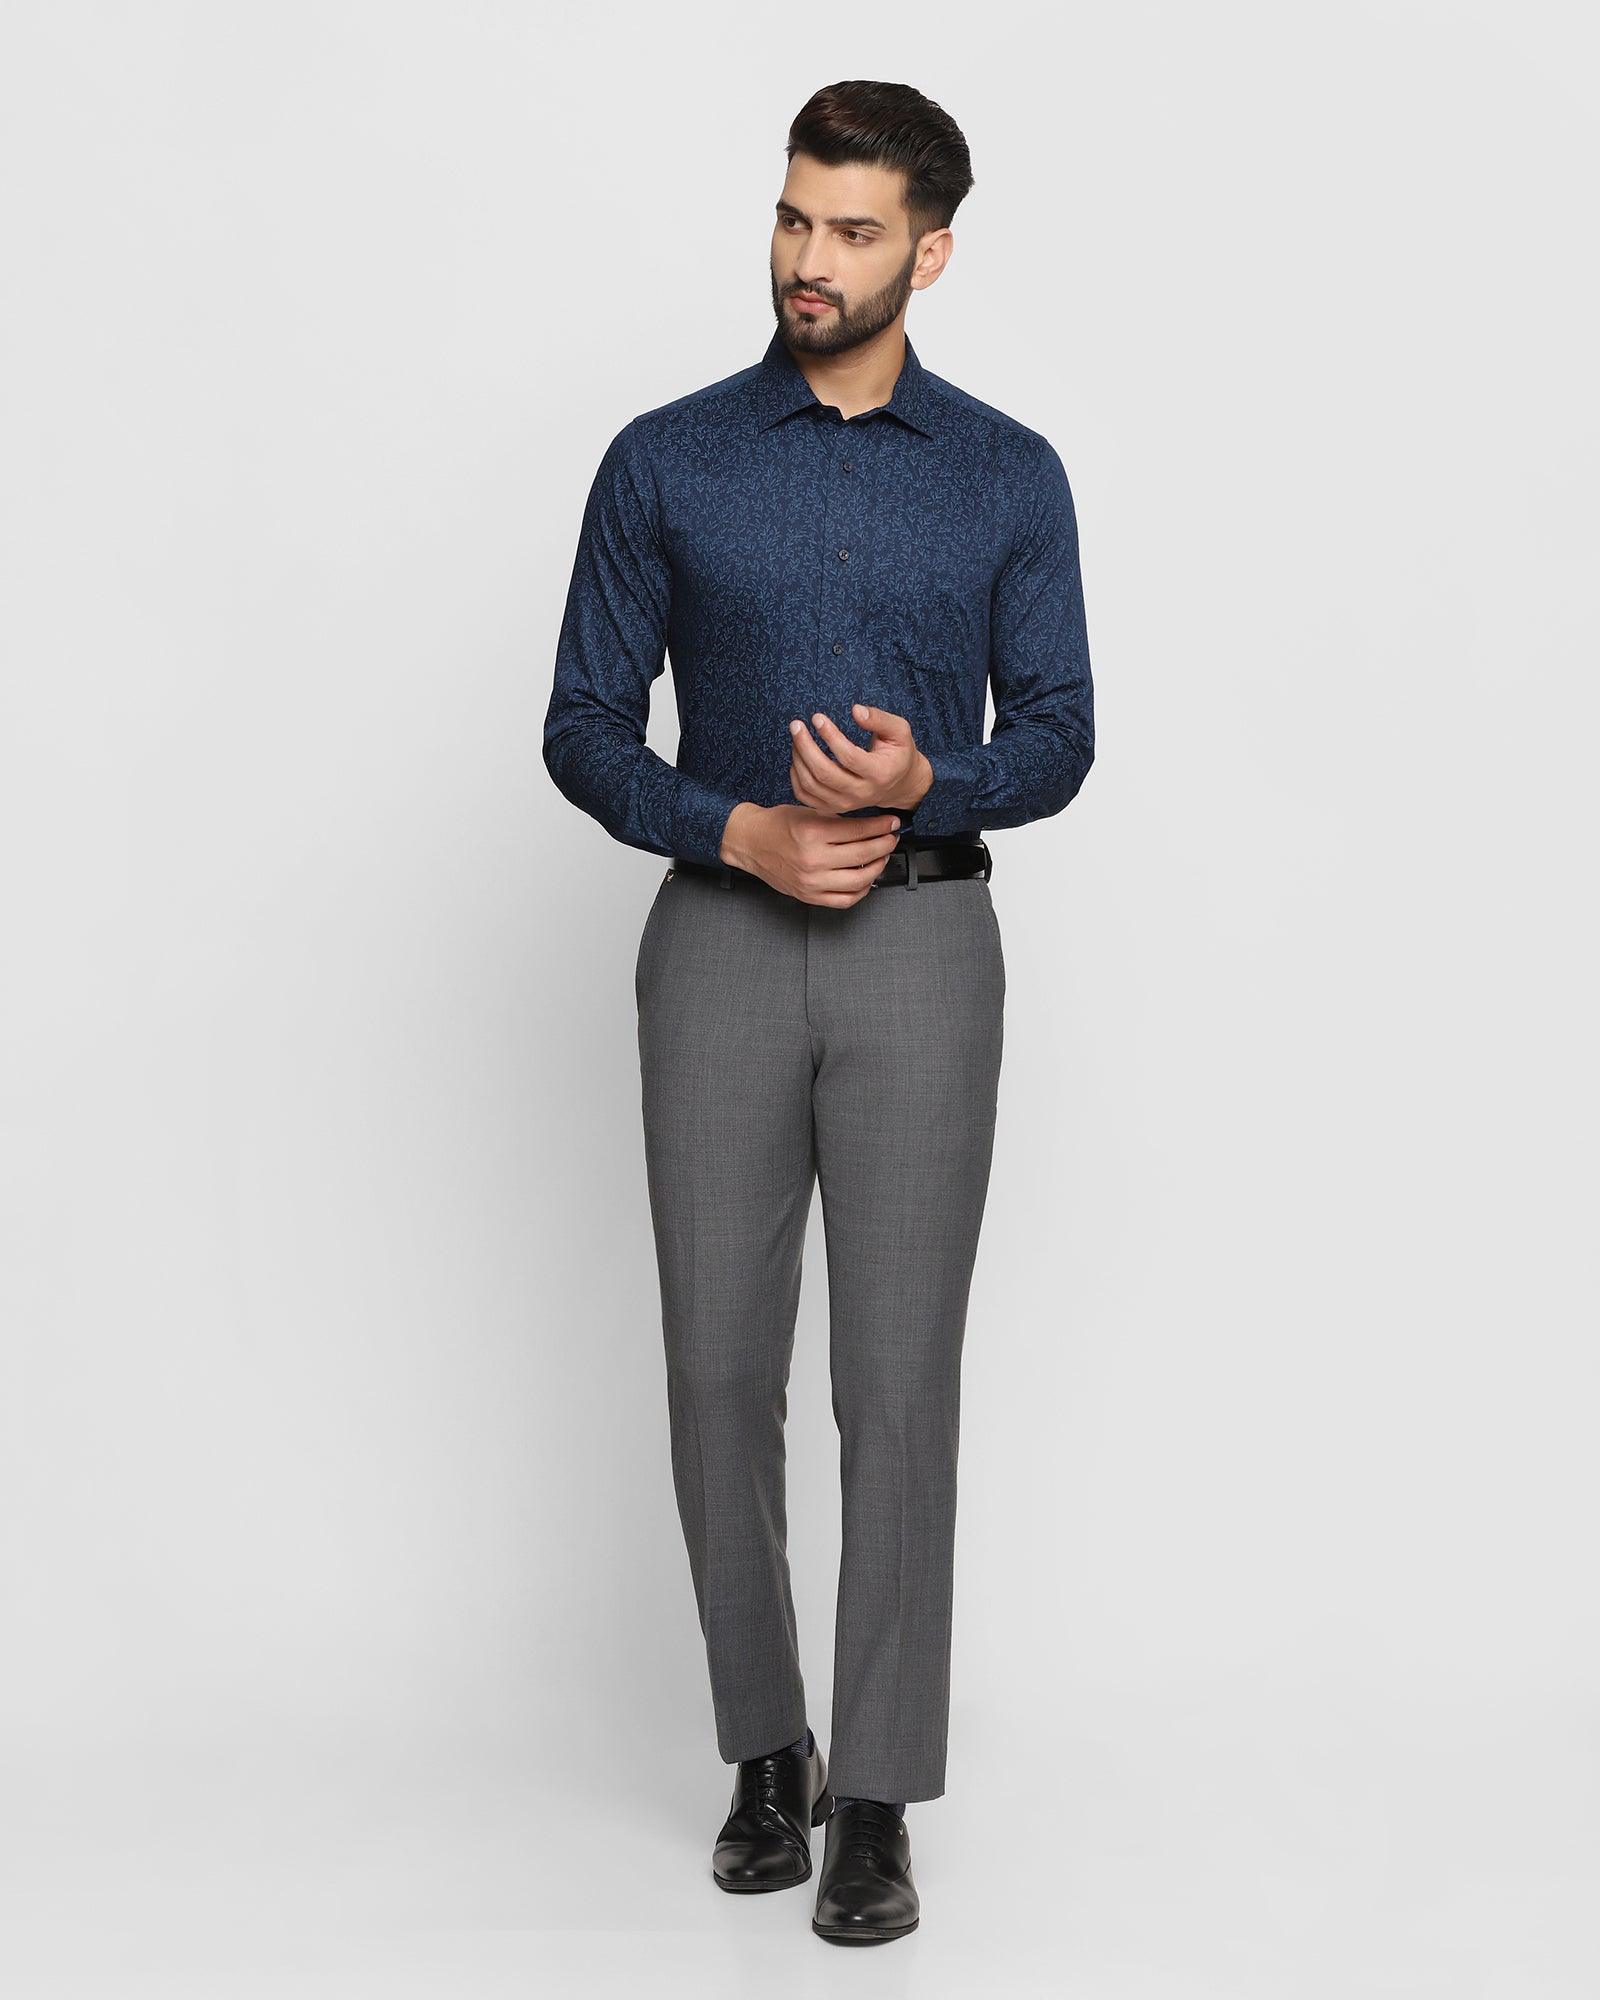 Luxe Slim Comfort B-95 Formal Charcoal Solid Trouser - Lupin